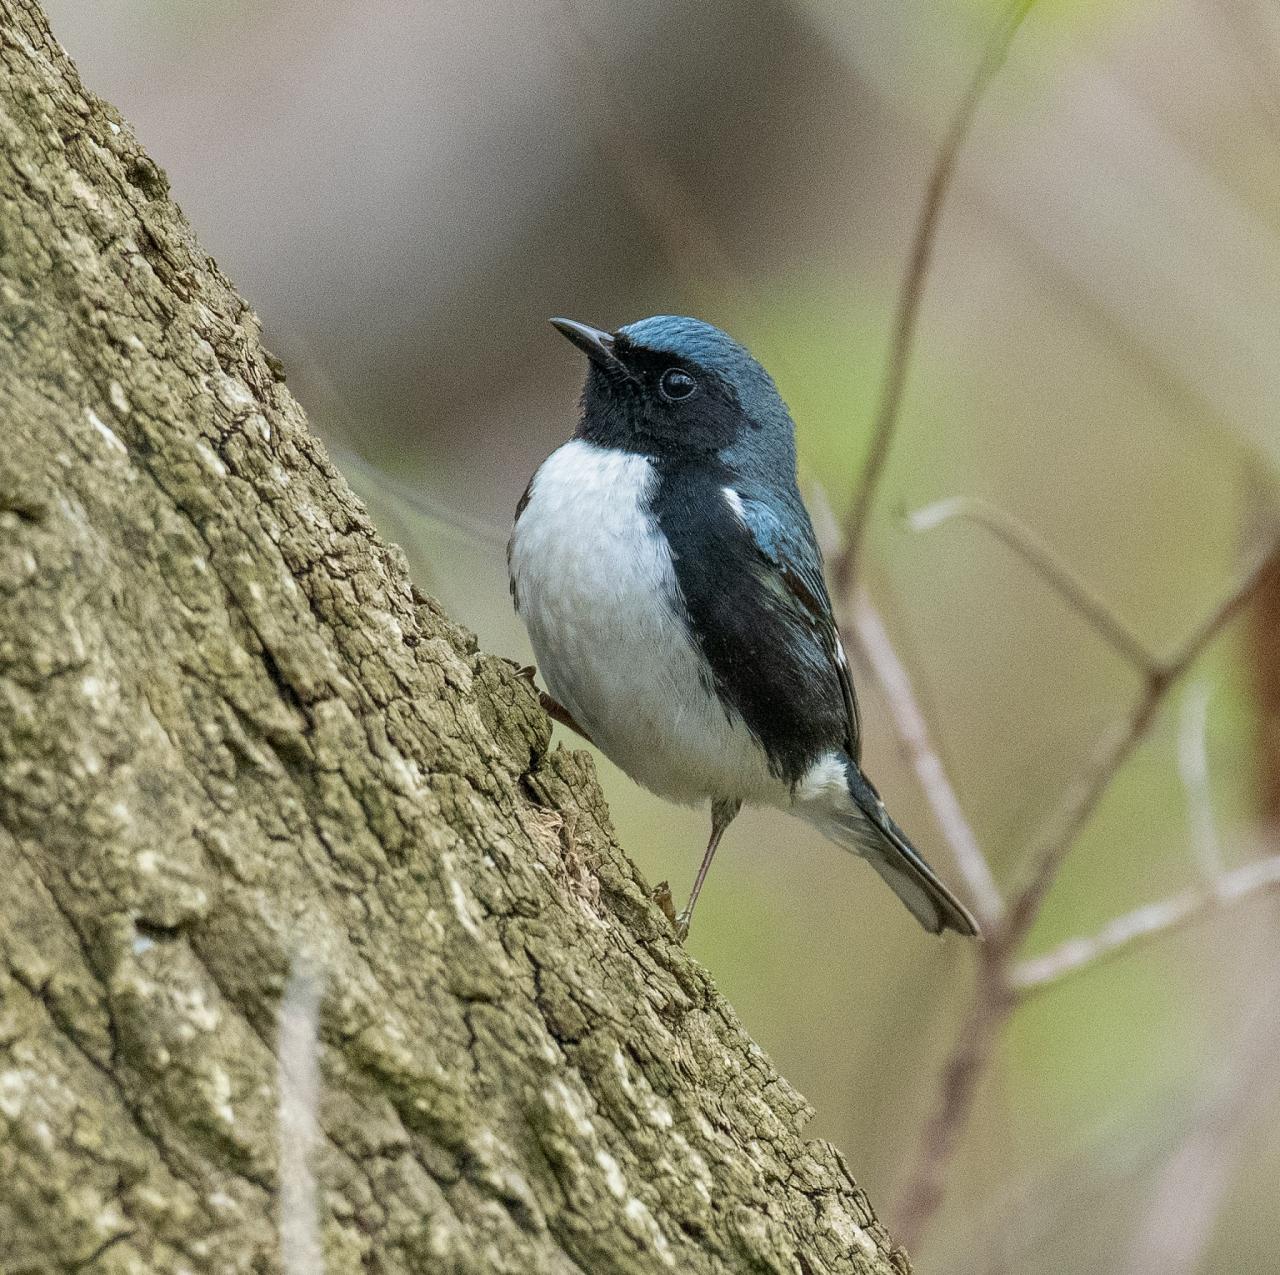 Black-throated Blue Warbler,Cape May, Cape May Migration, Fall Migration, Fall Migration Tour, Cape May Birding Tour, Naturalist Journeys